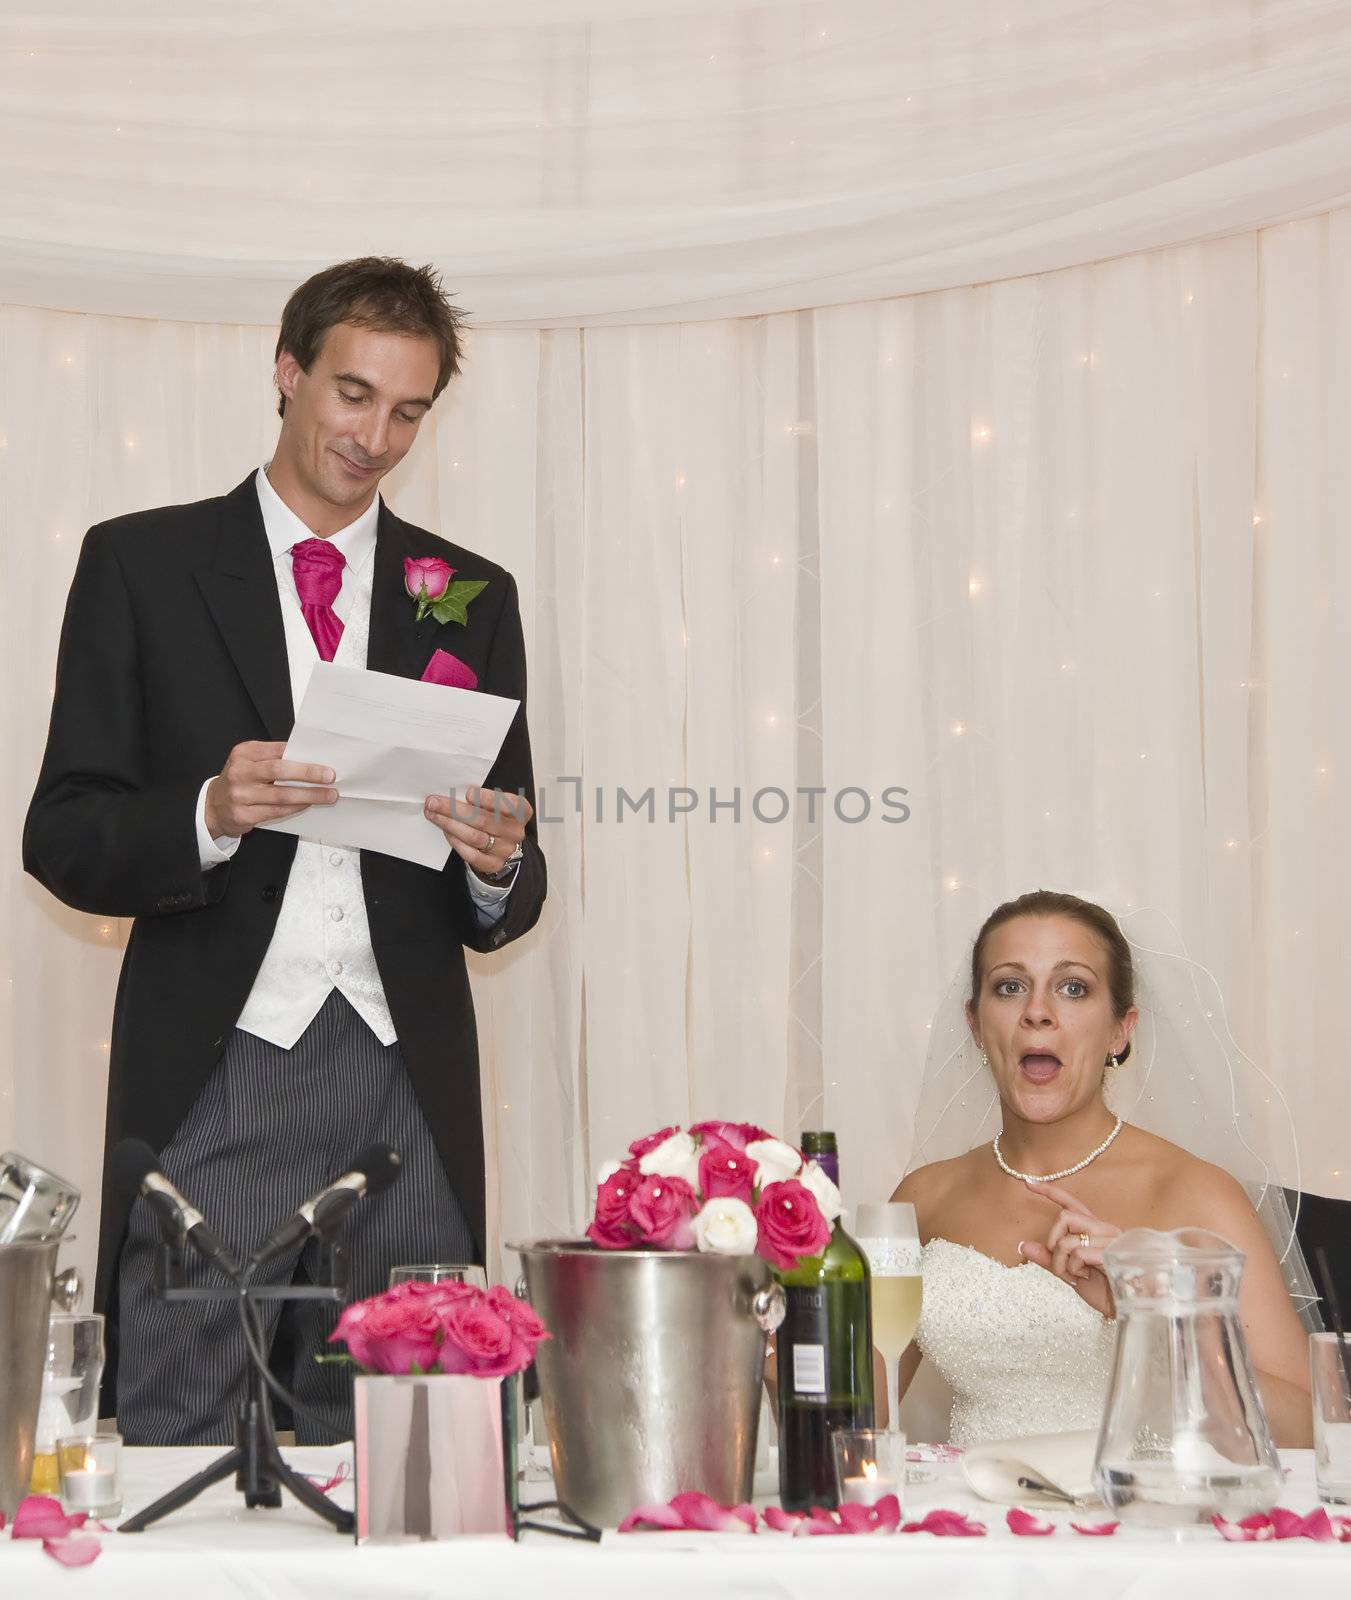 Bride's natural reaction to groom's speech at real wedding by Veneratio